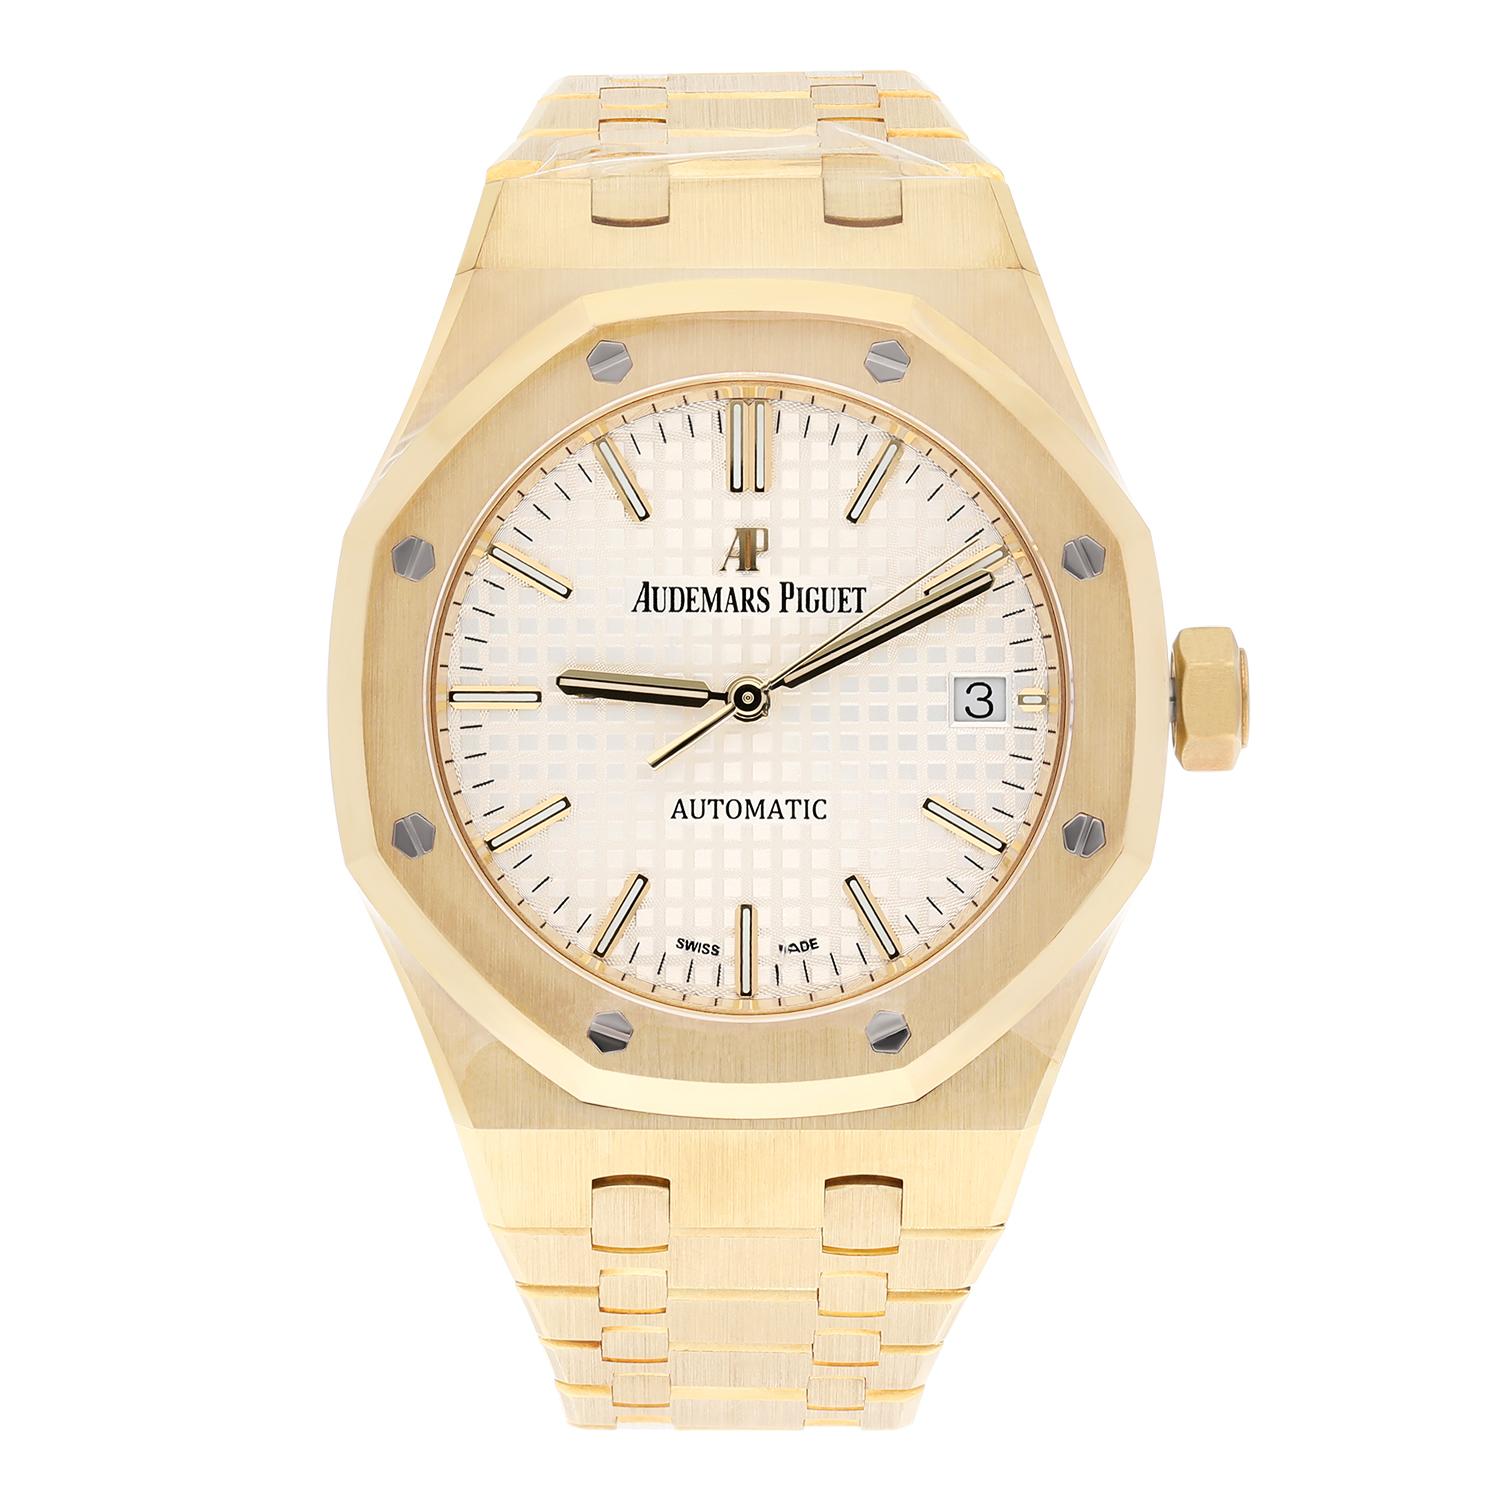 Audemars Piguet 15450BA.OO.1256BA.01 Royal Oak Selfwinding 37mm Silver Index Yellow Gold Watch, New (Old Stock), factory plastic protection intact, bracelet has couple very minor scuffs due to the store display. Comes complete with original box and